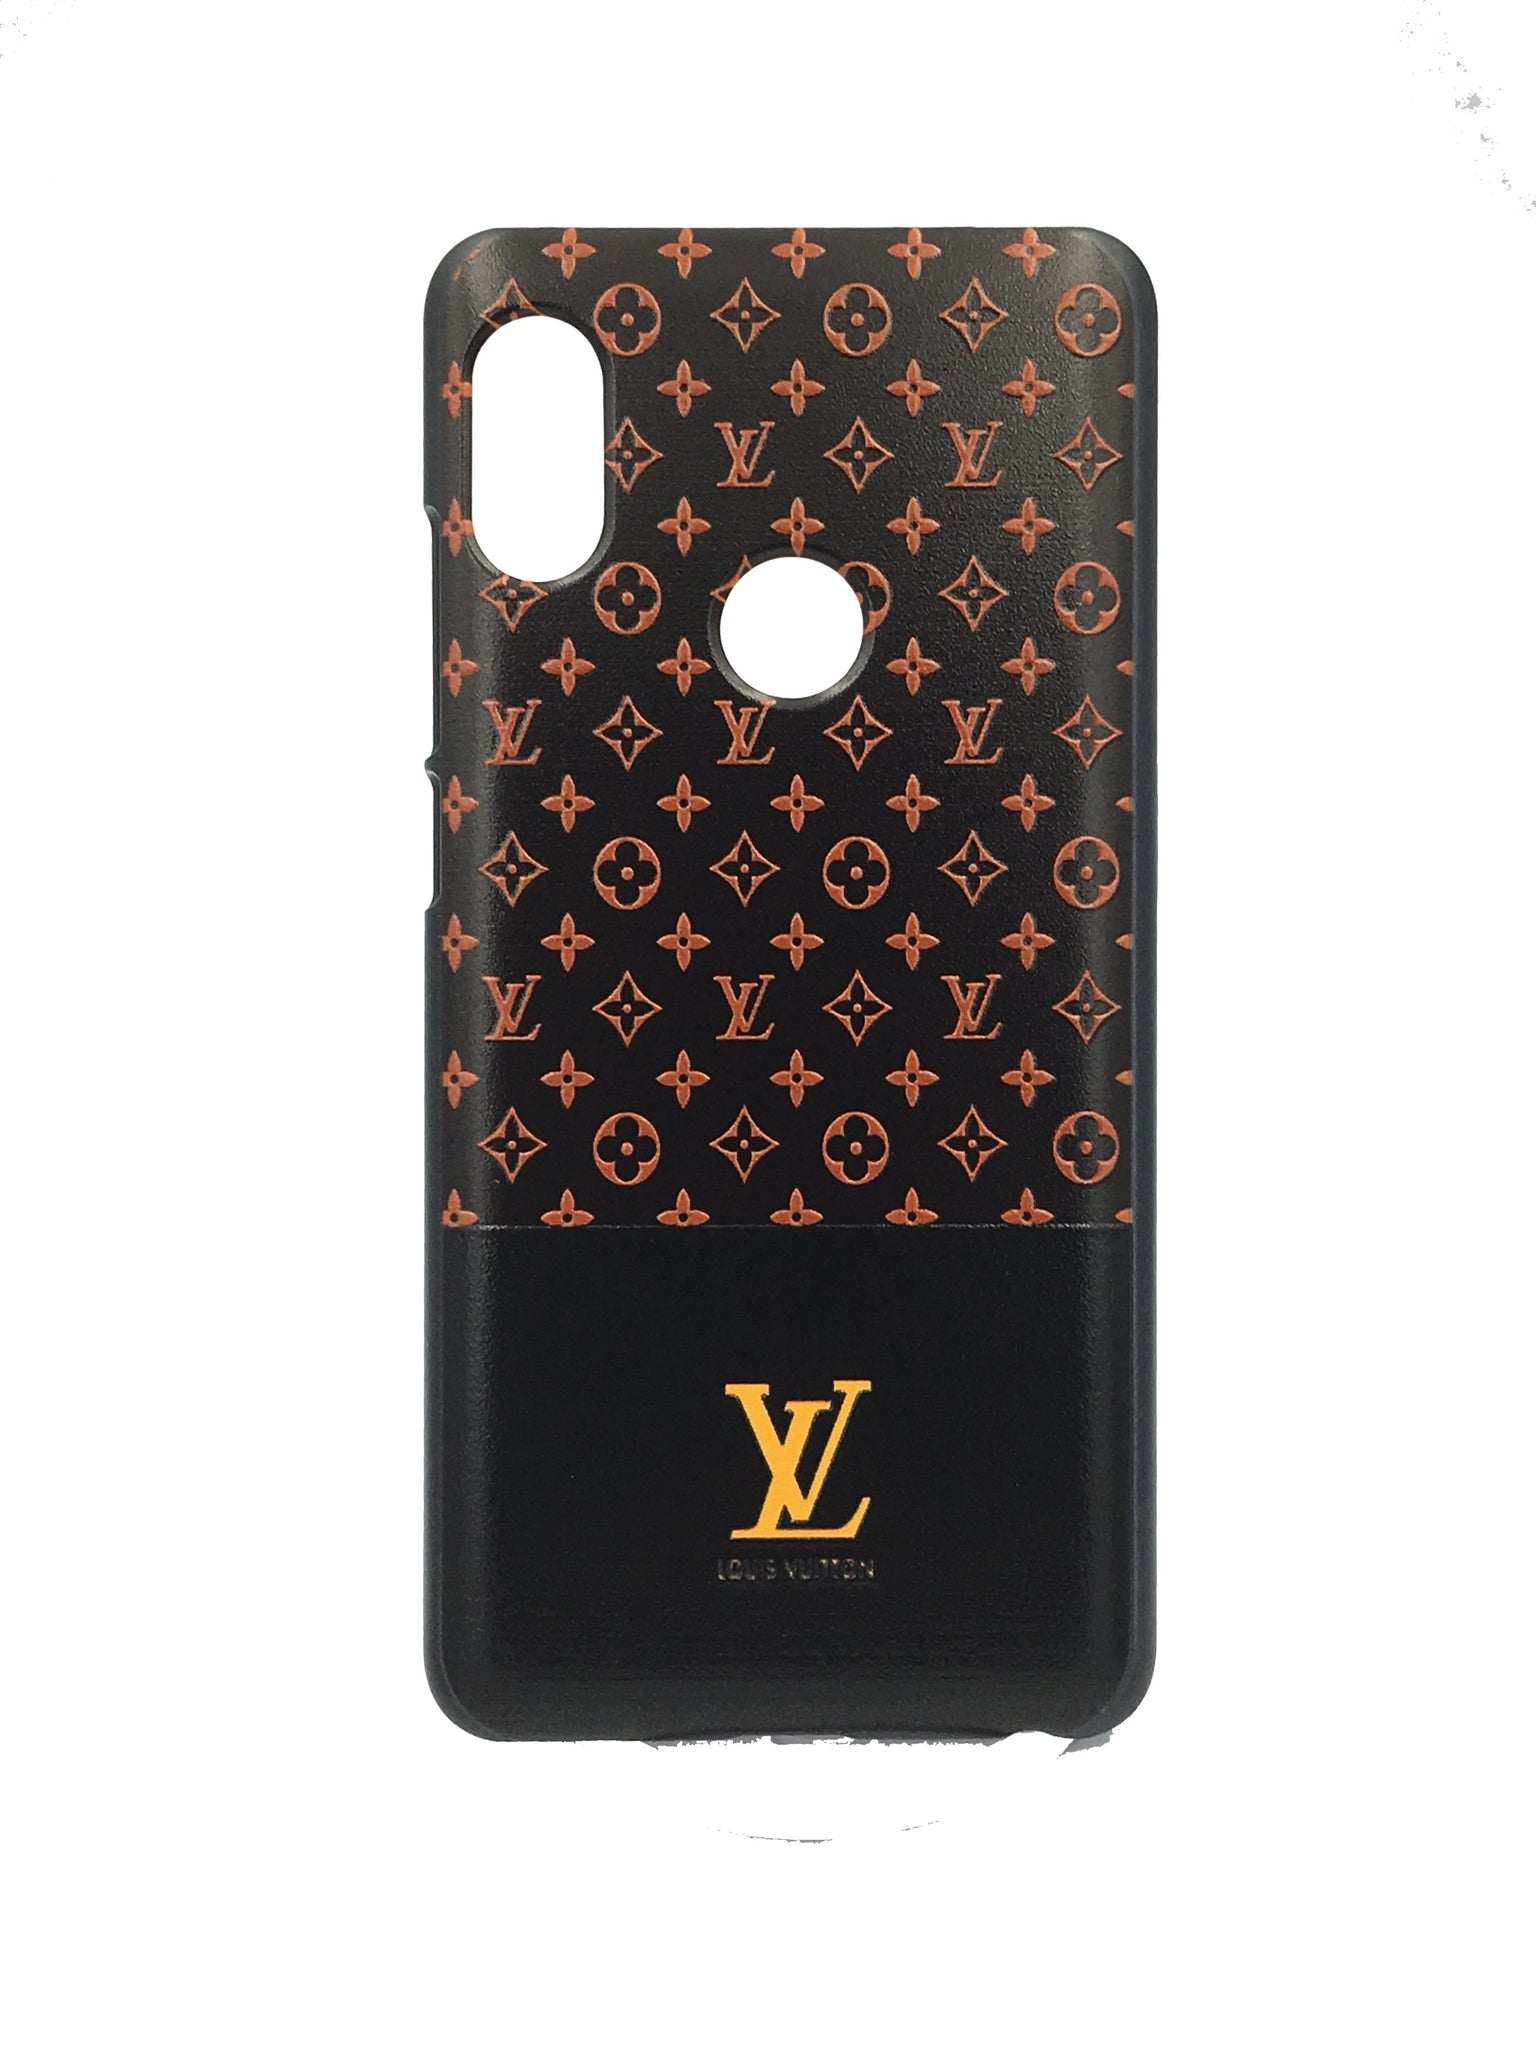 Shop Louis Vuitton Phone Case For Iphone 5s with great discounts